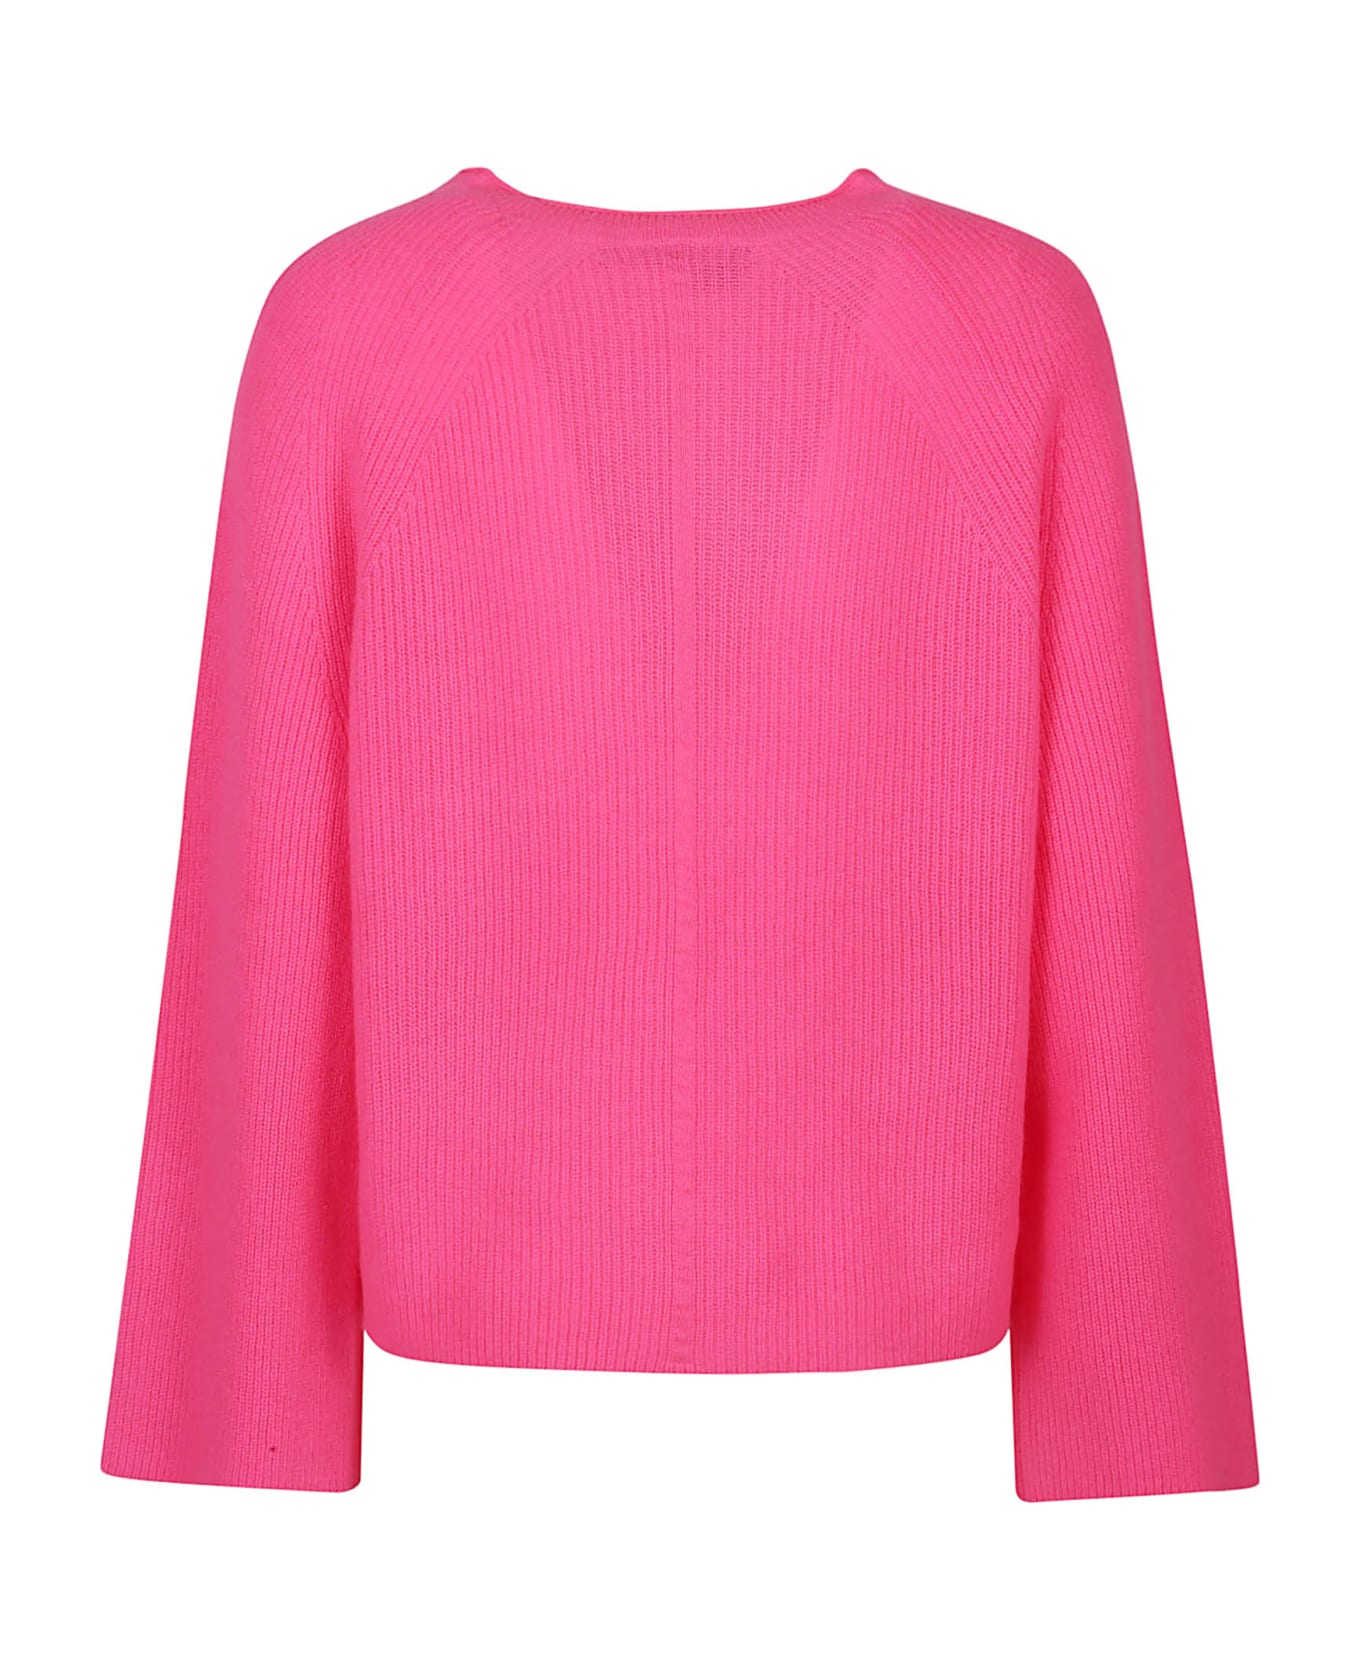 360Cashmere Sophie Trapeze Round Neck Sweater - Day Glo ニットウェア